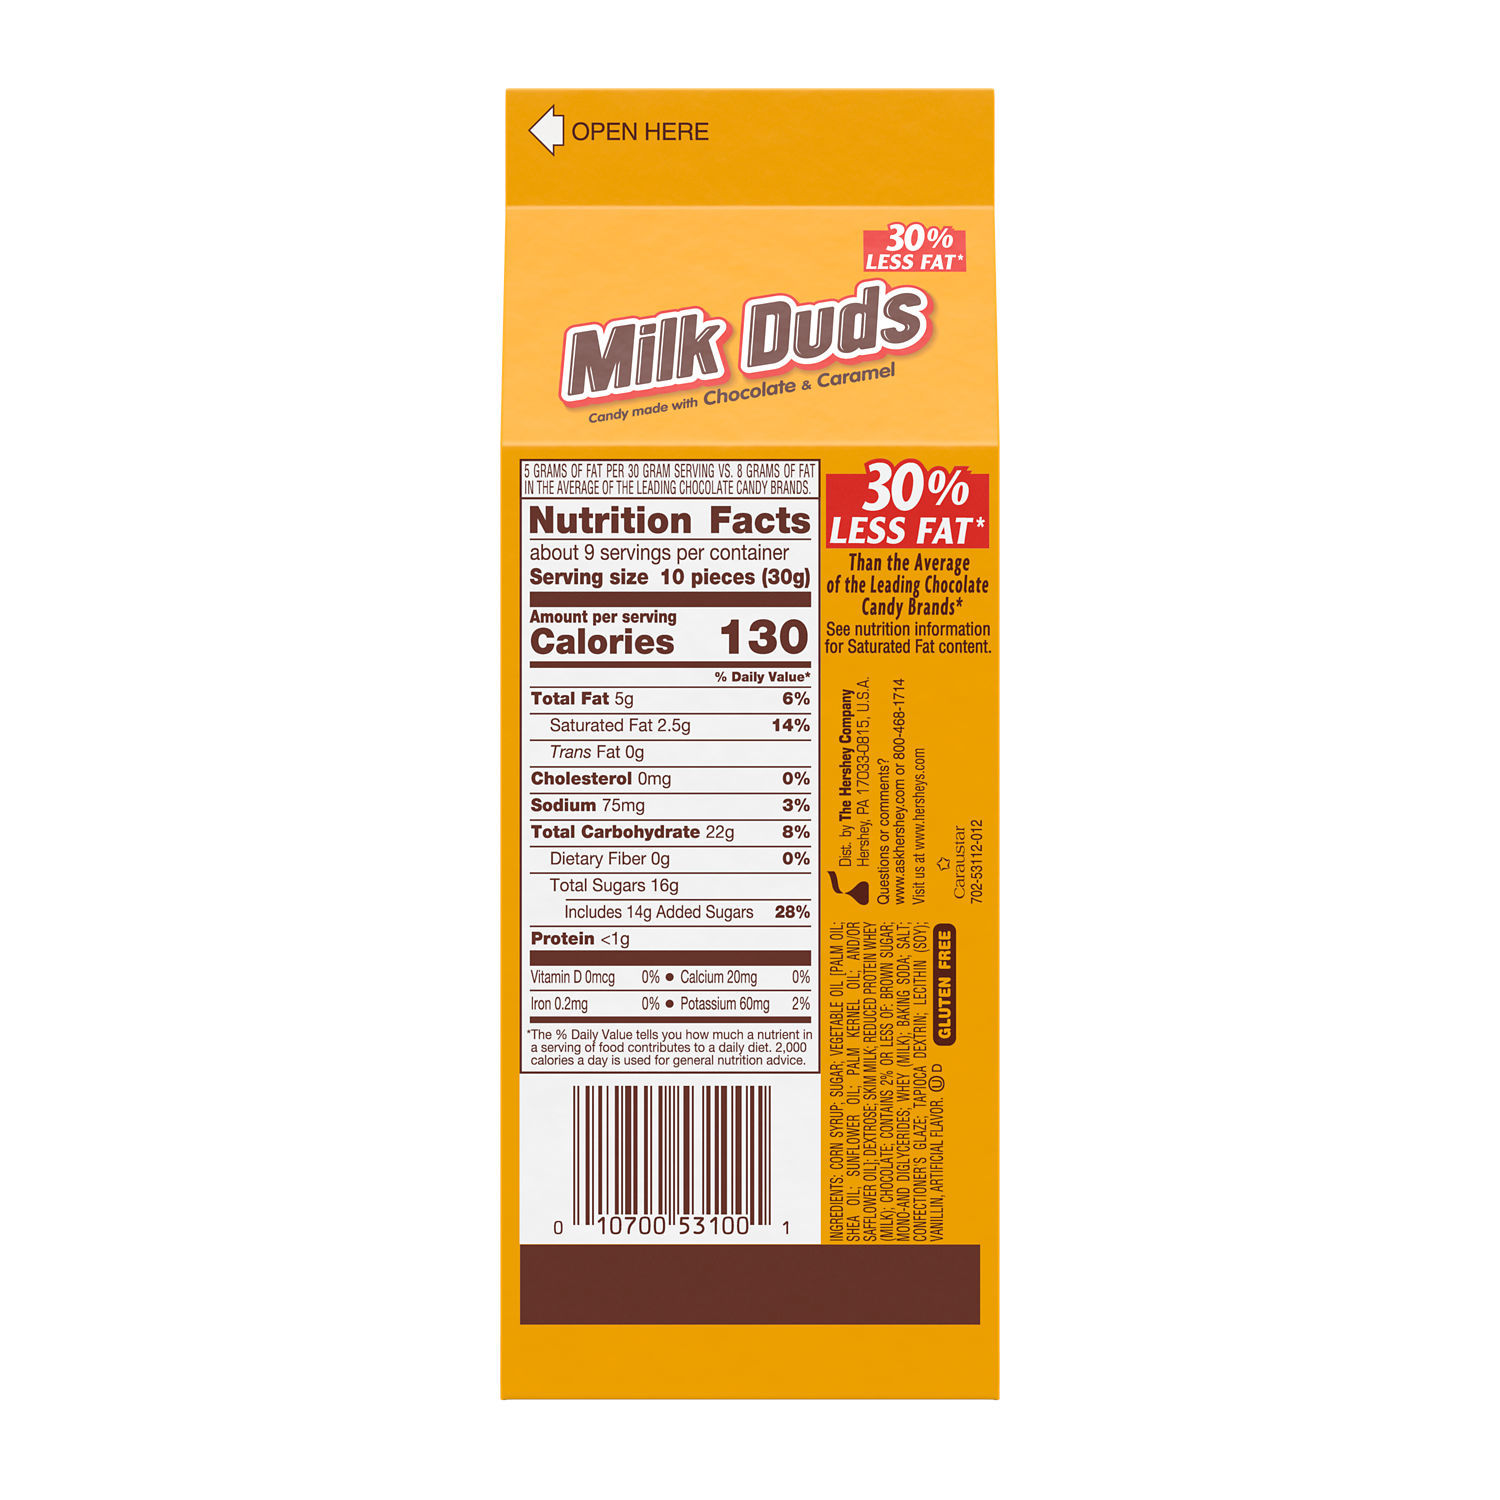 Milk Duds Chocolate and Caramel Candy, Box 10 oz - image 3 of 9